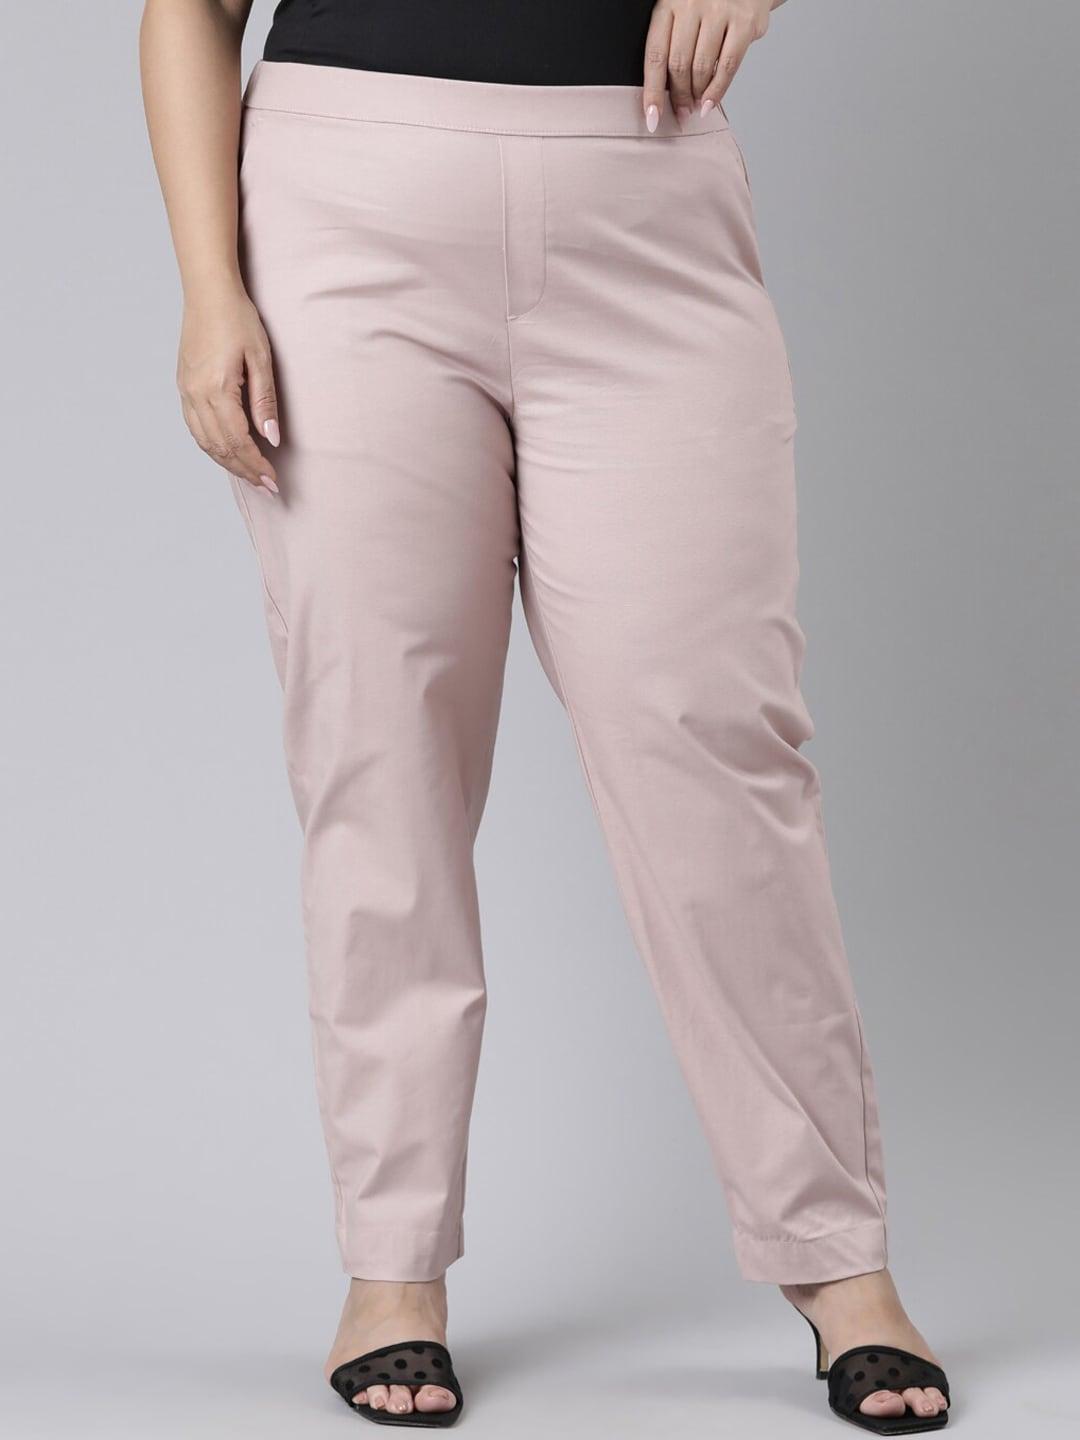 go-colors-women-plus-size-pink-cotton-straight-fit-chinos-trousers